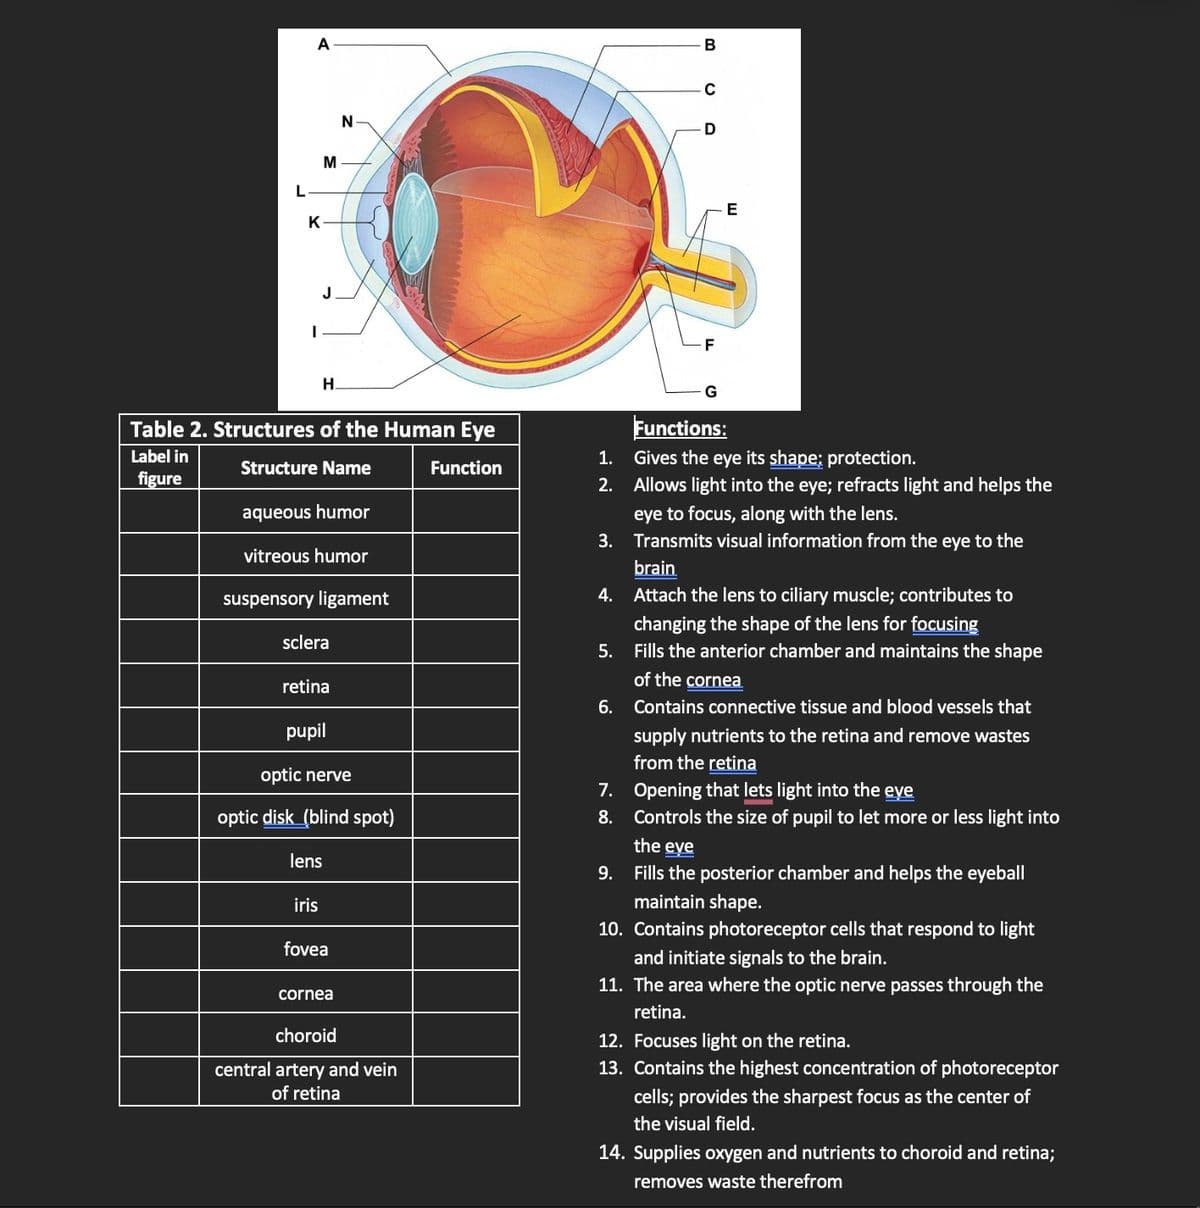 L
A
K
I
M
J
H.
Table 2. Structures of the Human Eye
Label in
Structure Name
Function
figure
aqueous humor
vitreous humor
suspensory ligament
sclera
retina
pupil
iris
N
optic nerve
optic disk (blind spot)
lens
fovea
cornea
choroid
central artery and vein
of retina
1.
2.
B
C
7.
8.
D
-F
E
Functions:
Gives the eye its shape; protection.
Allows light into the eye; refracts light and helps the
eye to focus, along with the lens.
3.
Transmits visual information from the eye to the
brain
4.
Attach the lens to ciliary muscle; contributes to
changing the shape of the lens for focusing
5. Fills the anterior chamber and maintains the shape
of the cornea
6. Contains connective tissue and blood vessels that
supply nutrients to the retina and remove wastes
from the retina
Opening that lets light into the eve
Controls the size of pupil to let more or less light into
the eve
9.
Fills the posterior chamber and helps the eyeball
maintain shape.
10. Contains photoreceptor cells that respond to light
and initiate signals to the brain.
11. The area where the optic nerve passes through the
retina.
12. Focuses light on the retina.
13. Contains the highest concentration of photoreceptor
cells; provides the sharpest focus as the center of
the visual field.
14. Supplies oxygen and nutrients to choroid and retina;
removes waste therefrom